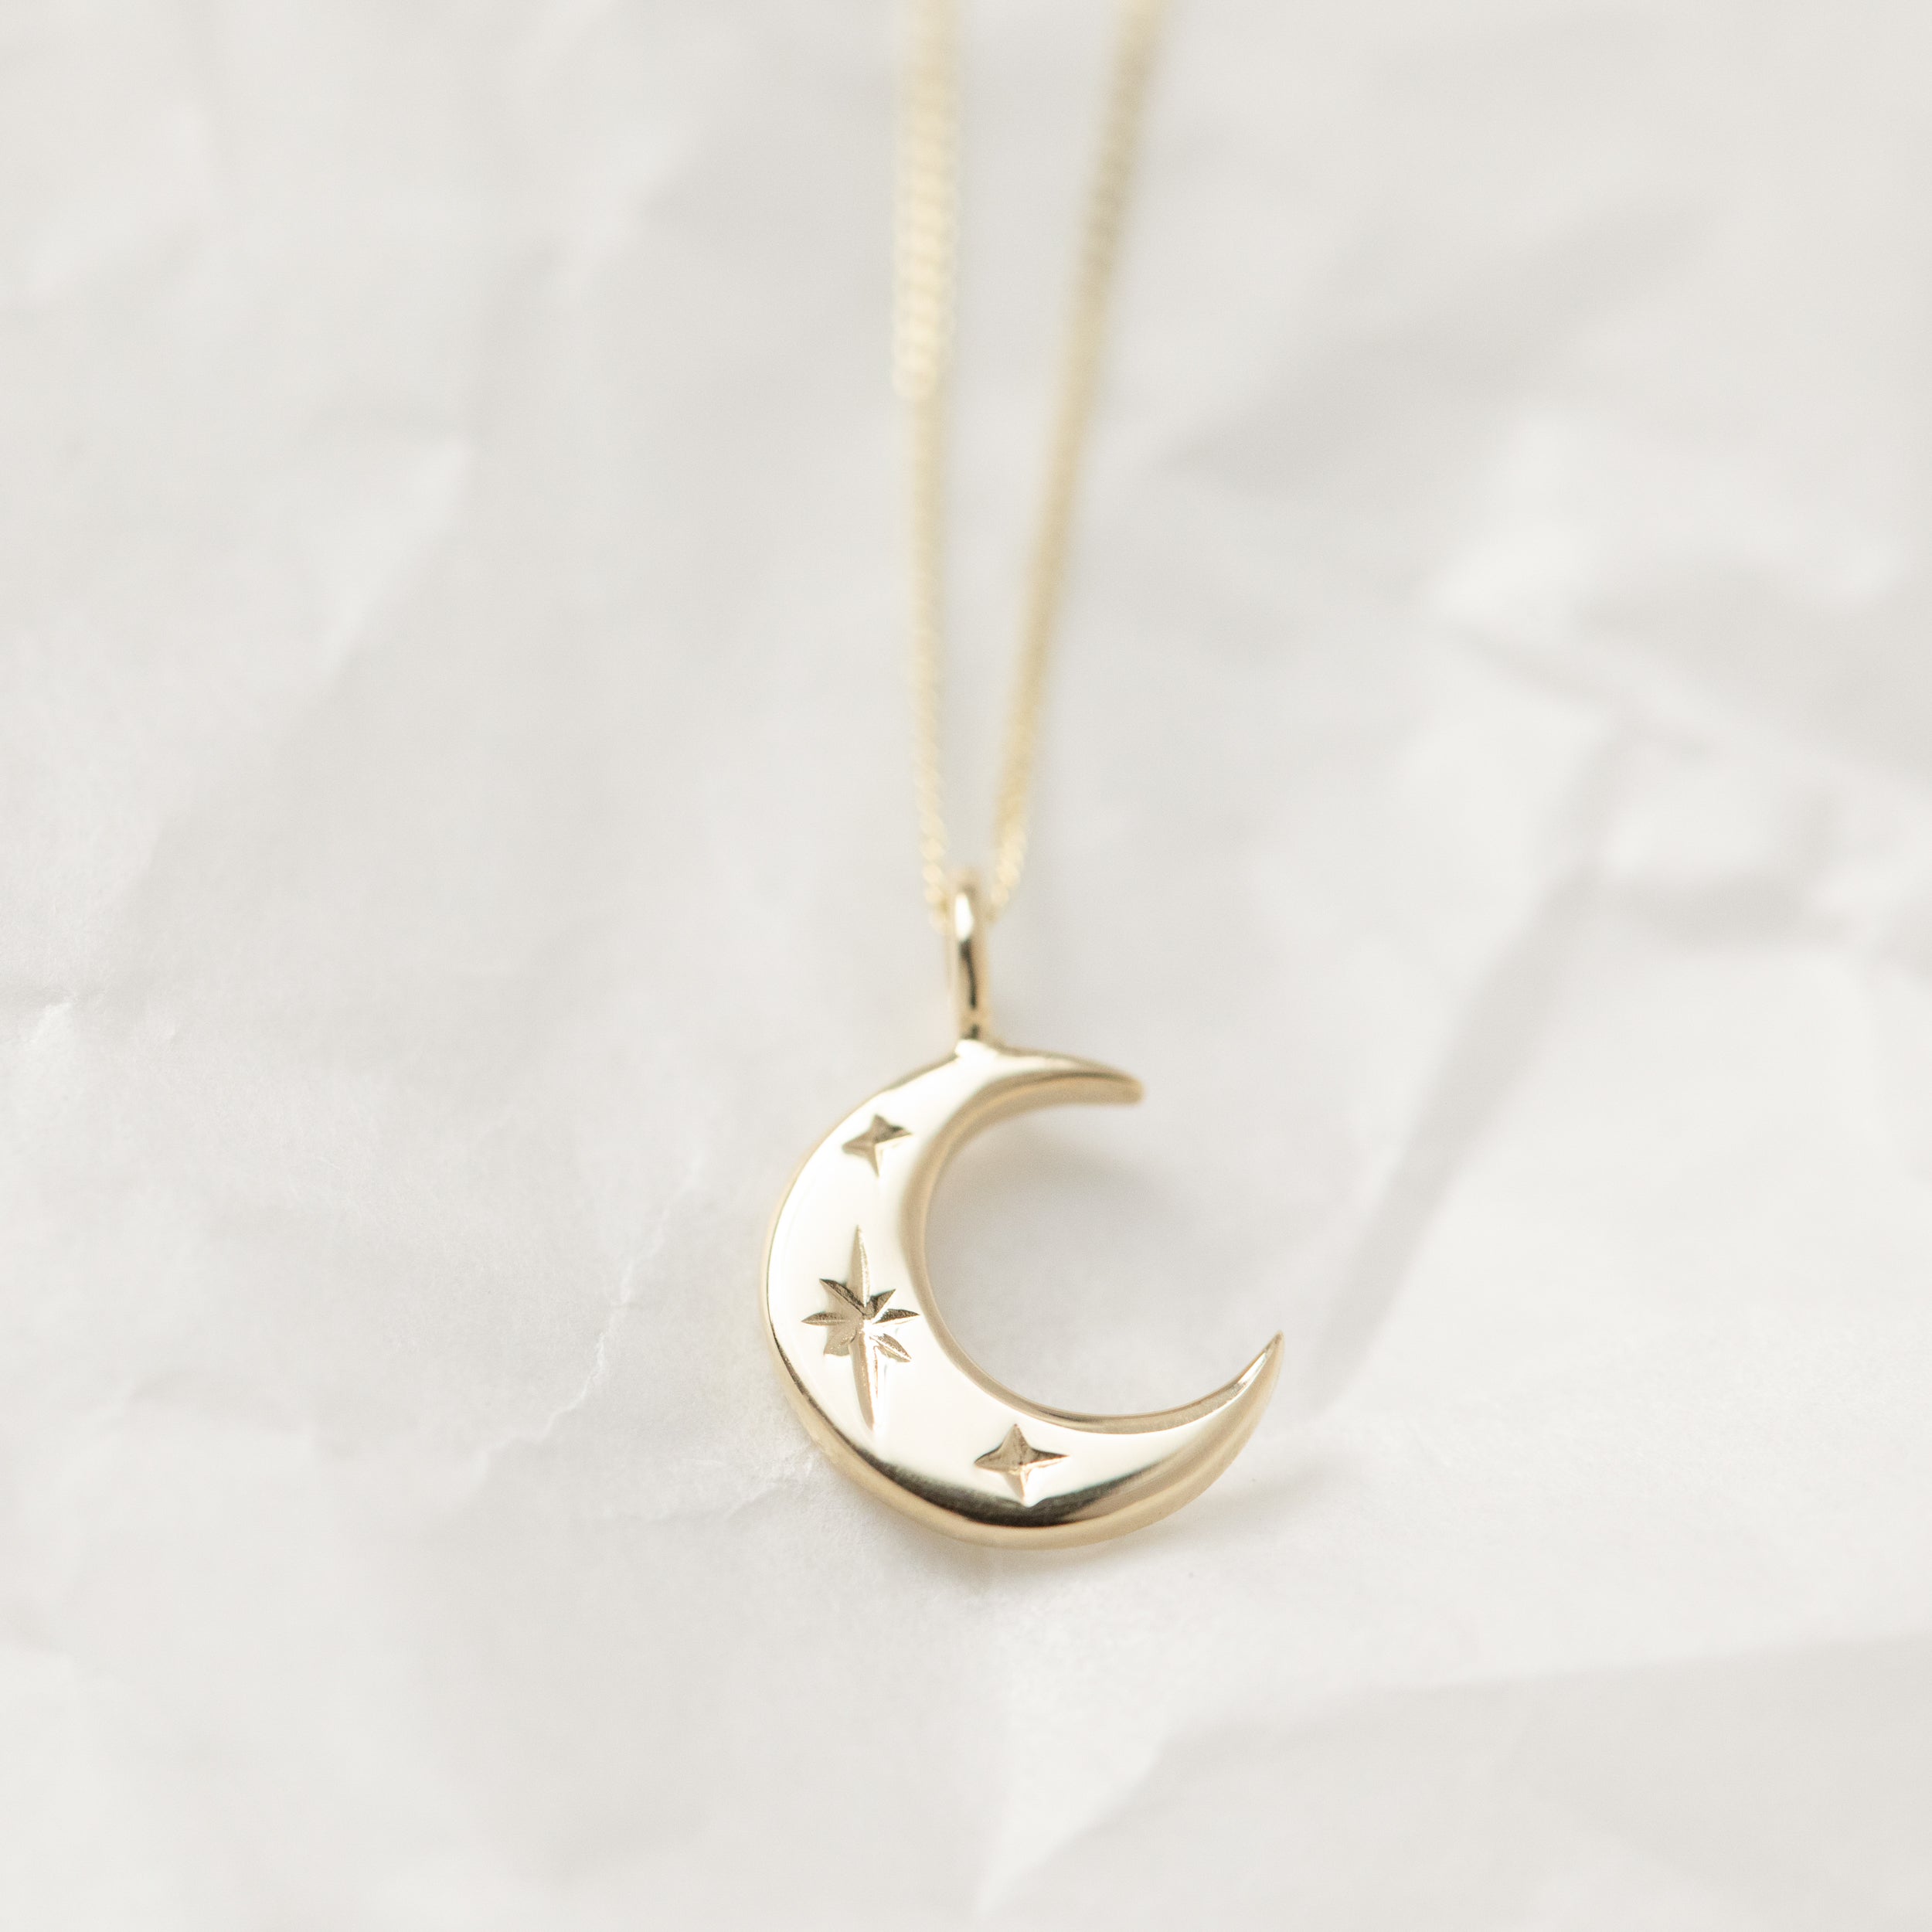 Moon Necklace Hammered, Sterling Silver Full Moon Pendant, Lunar Necklace, Moon  Jewellery, Christmas Gift for Wife, Handmade in the UK - Etsy